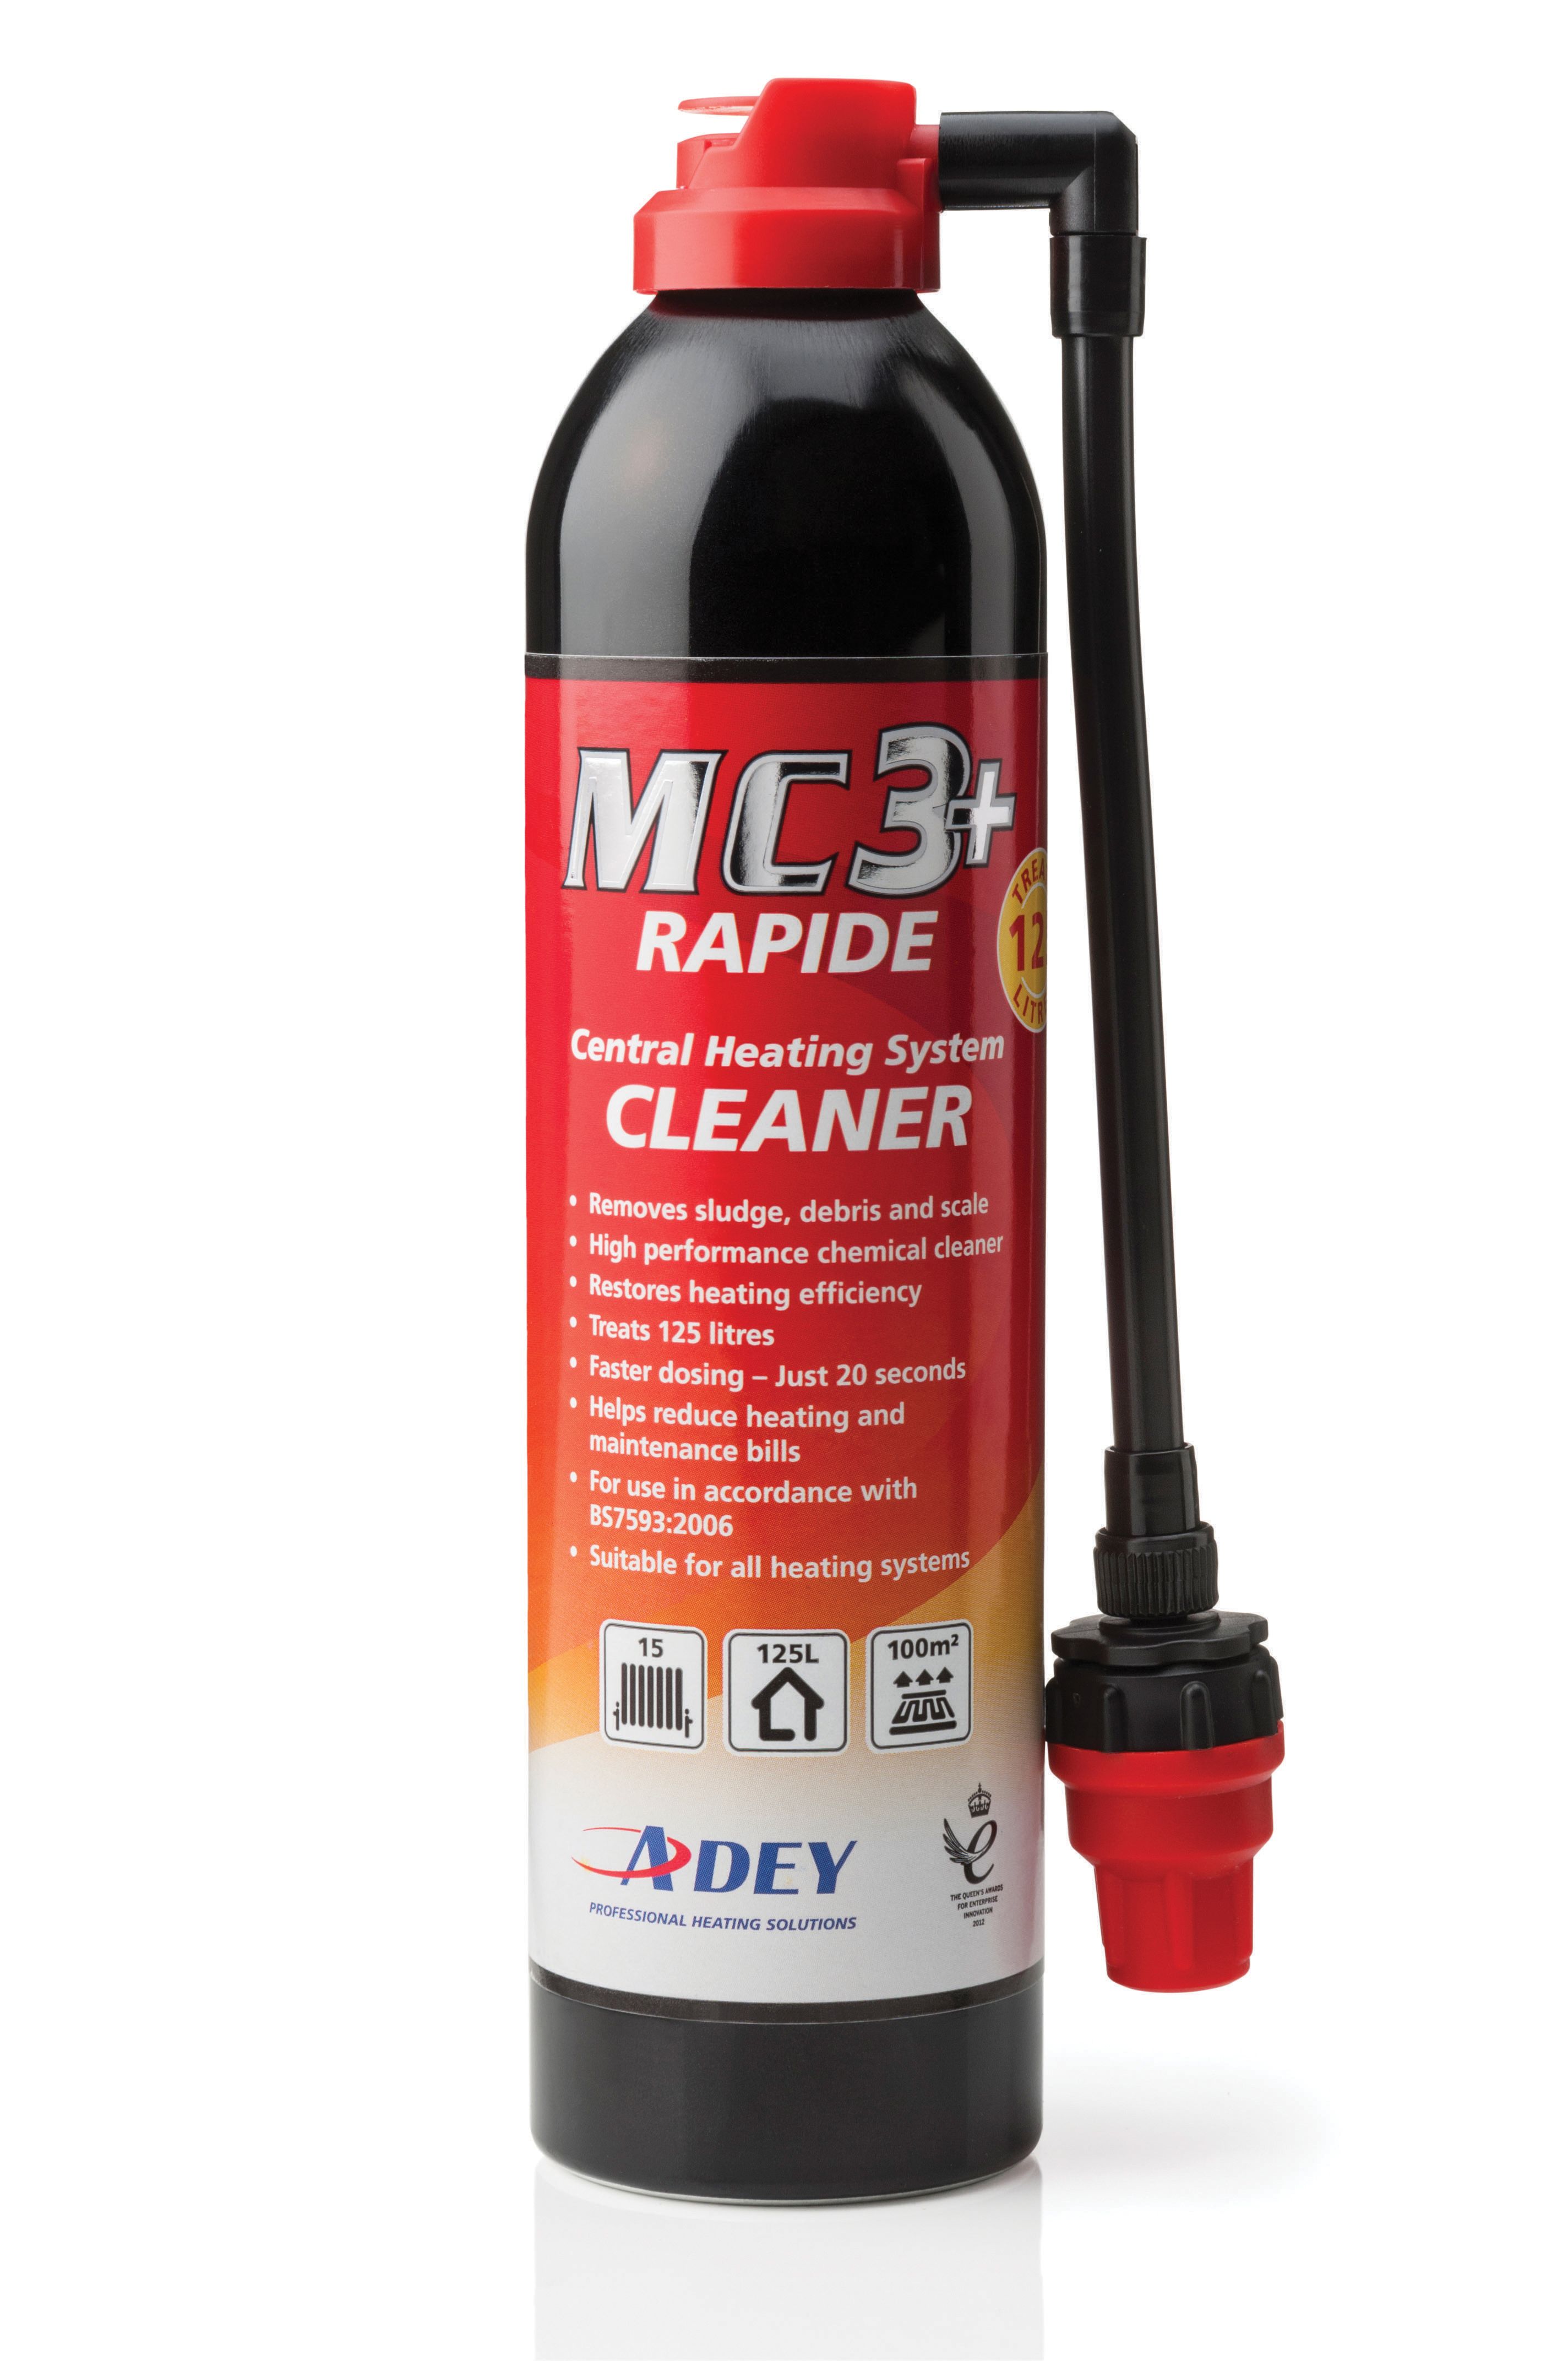 Adey MC3+ Magnaclean Rapide Central Heating System Cleaner - 300ml